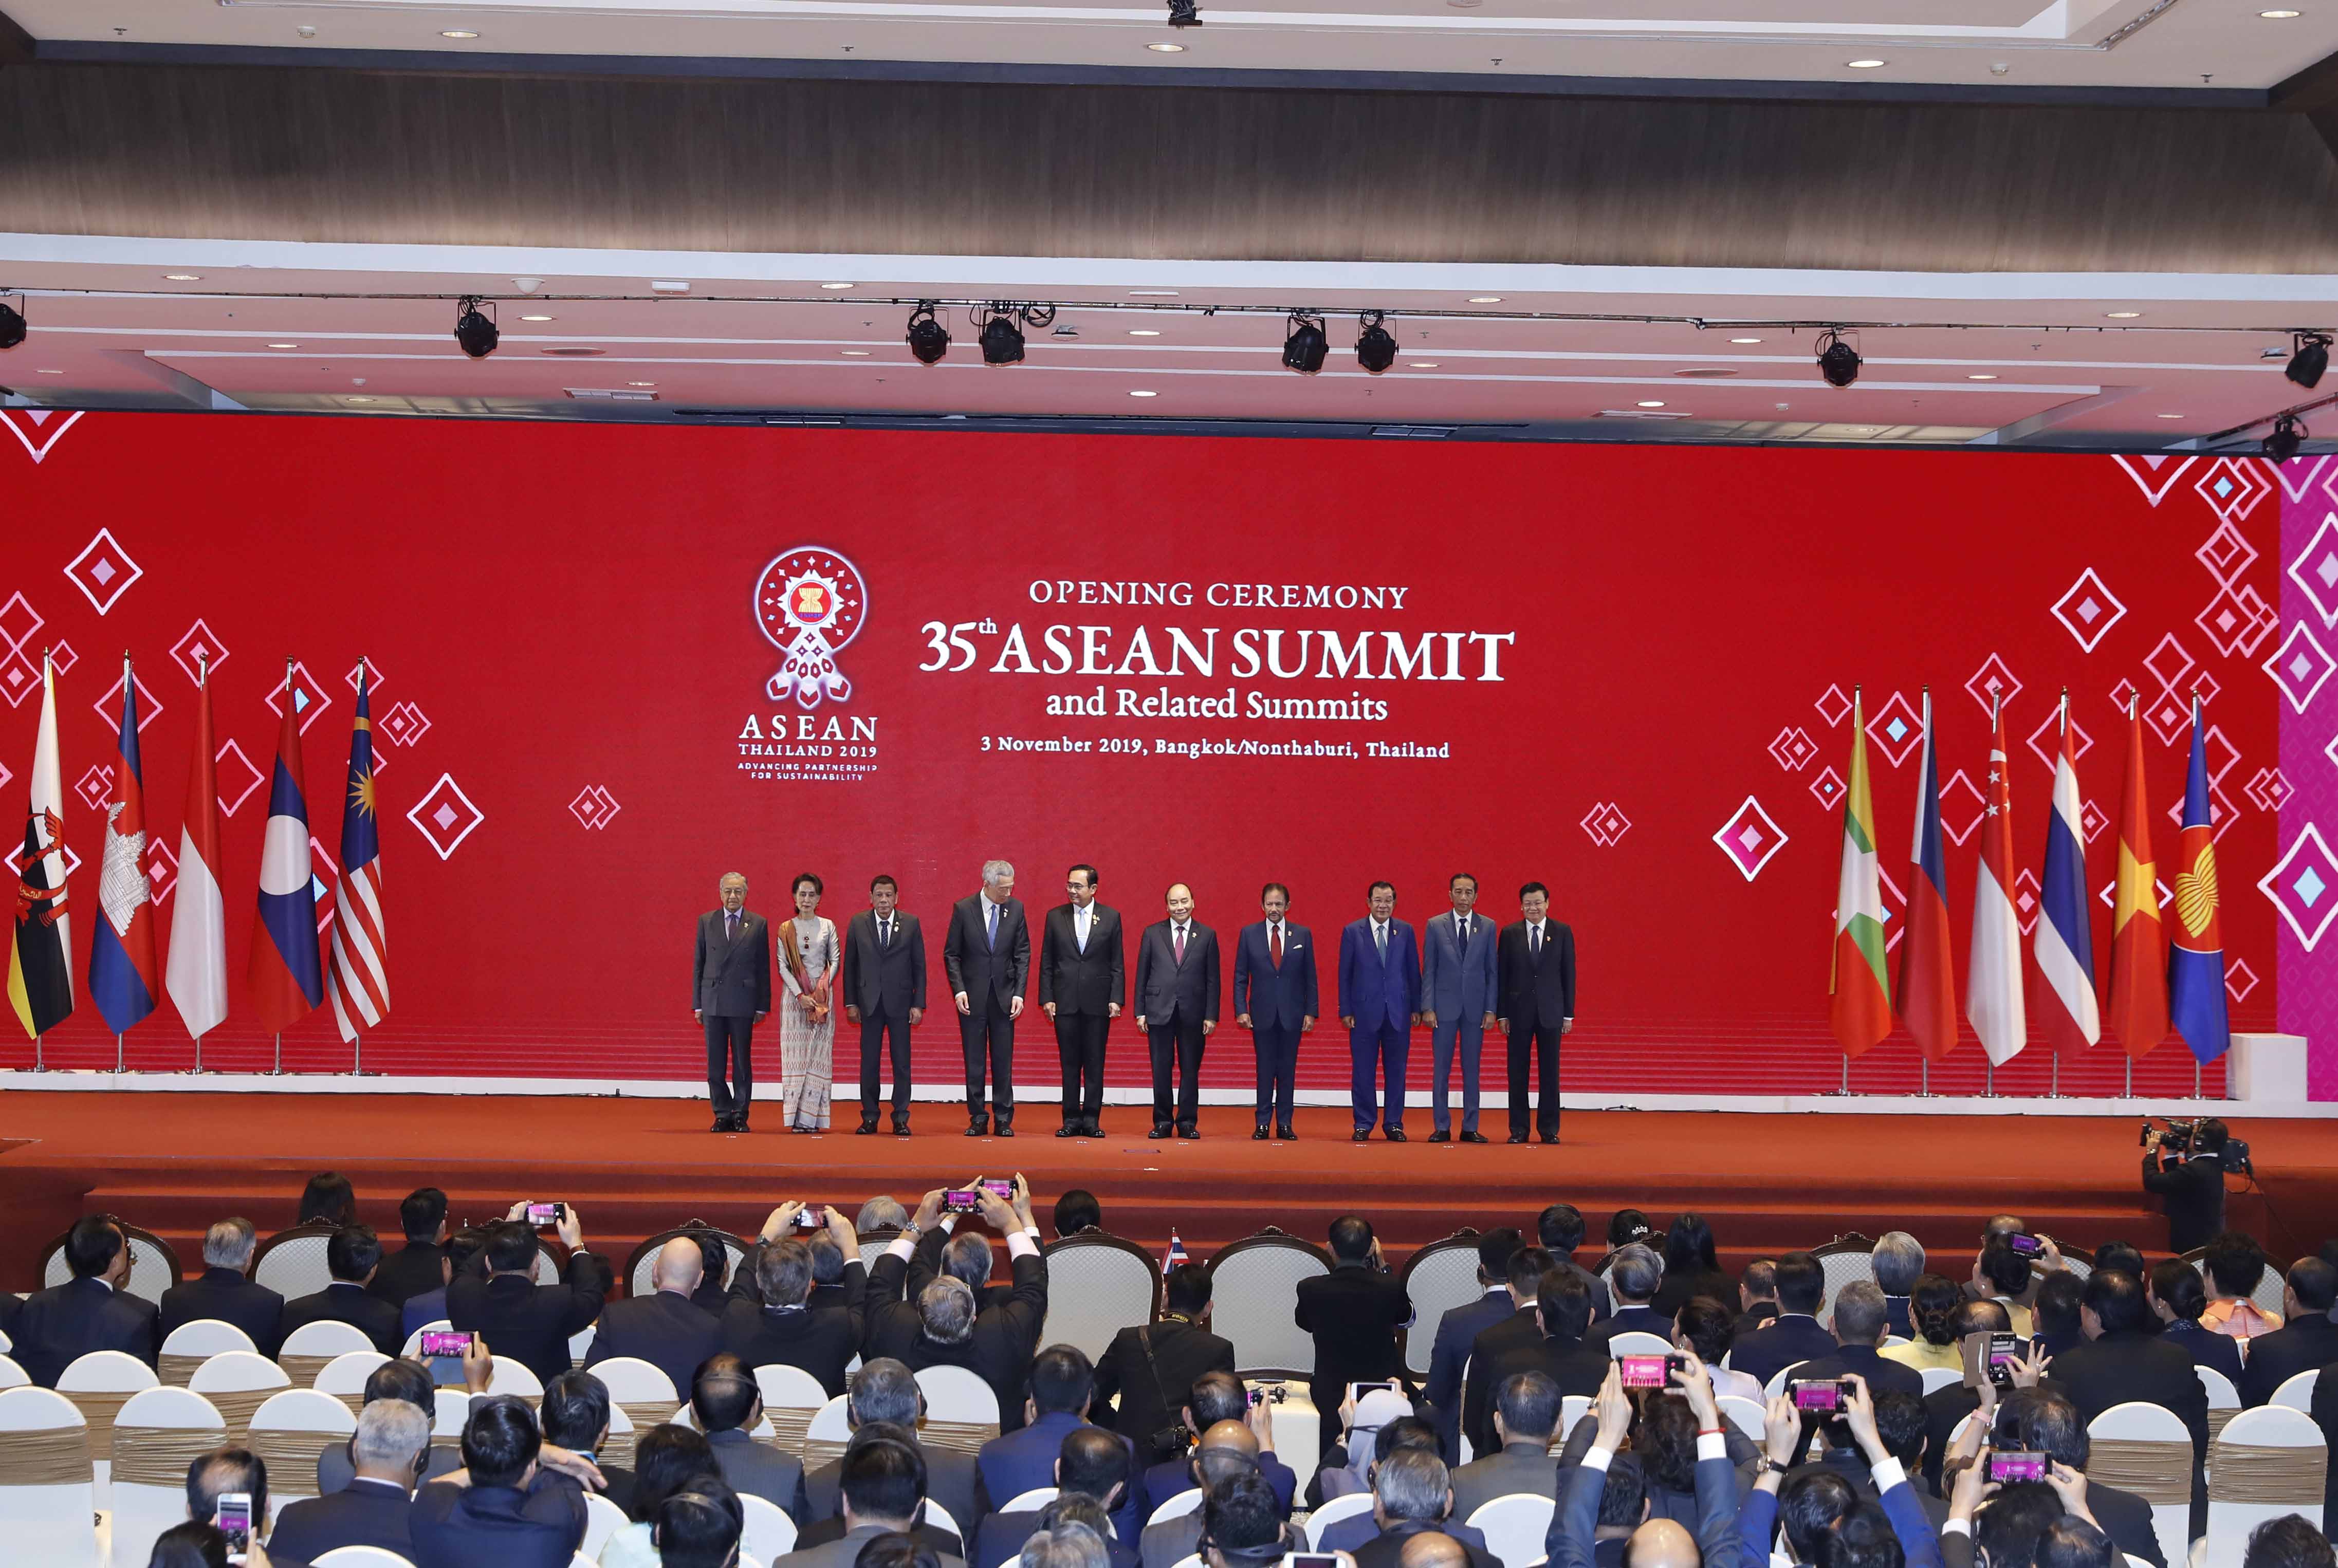 Prime Minister Nguyen Xuan Phuc attended the 35th ASEAN Summit in Bangkok